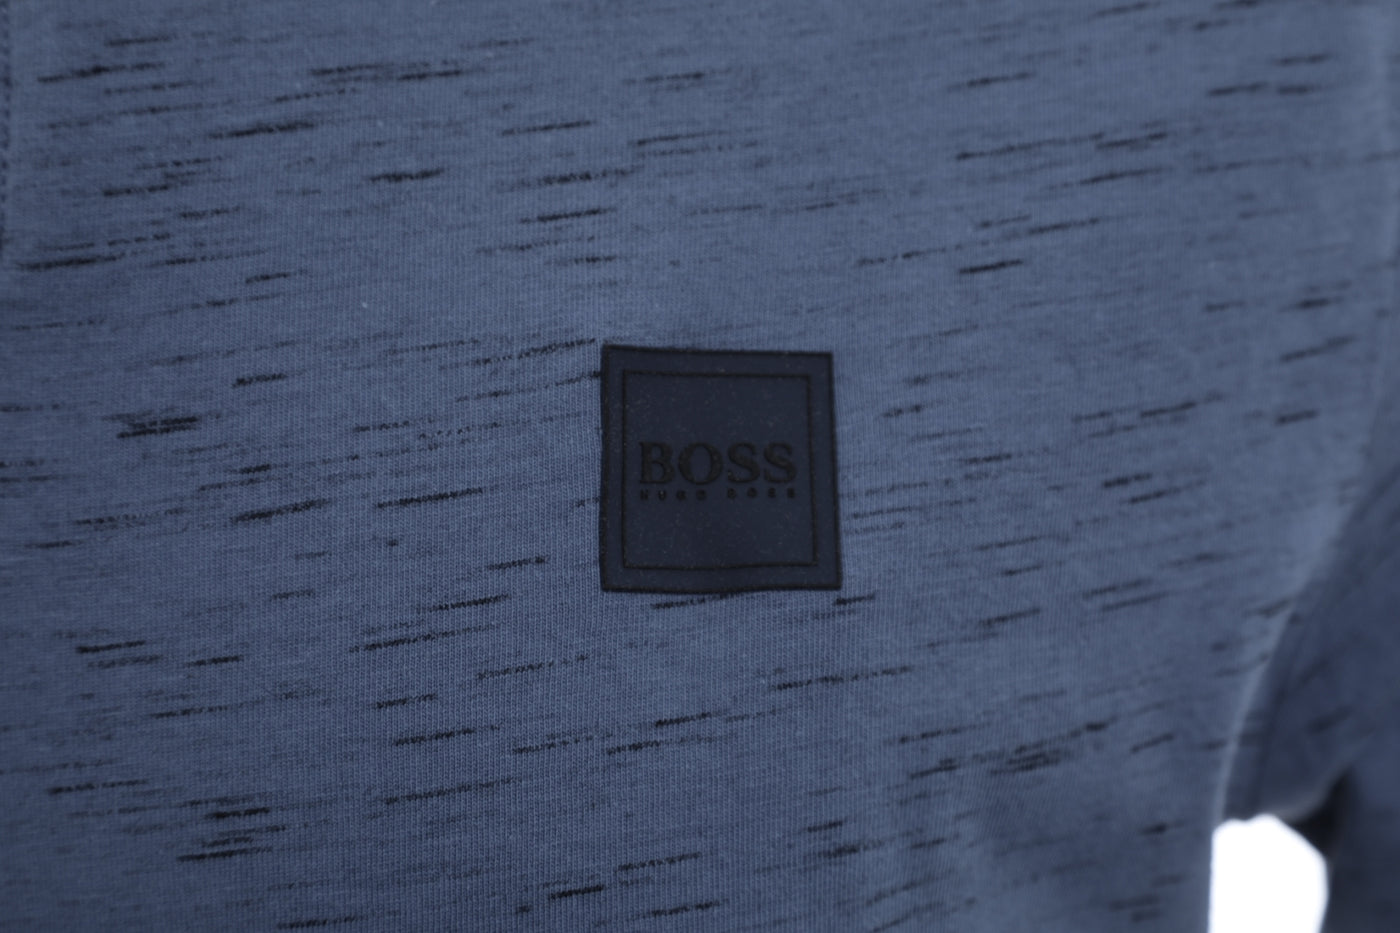 BOSS Pemew Polo Shirt in Airforce Blue